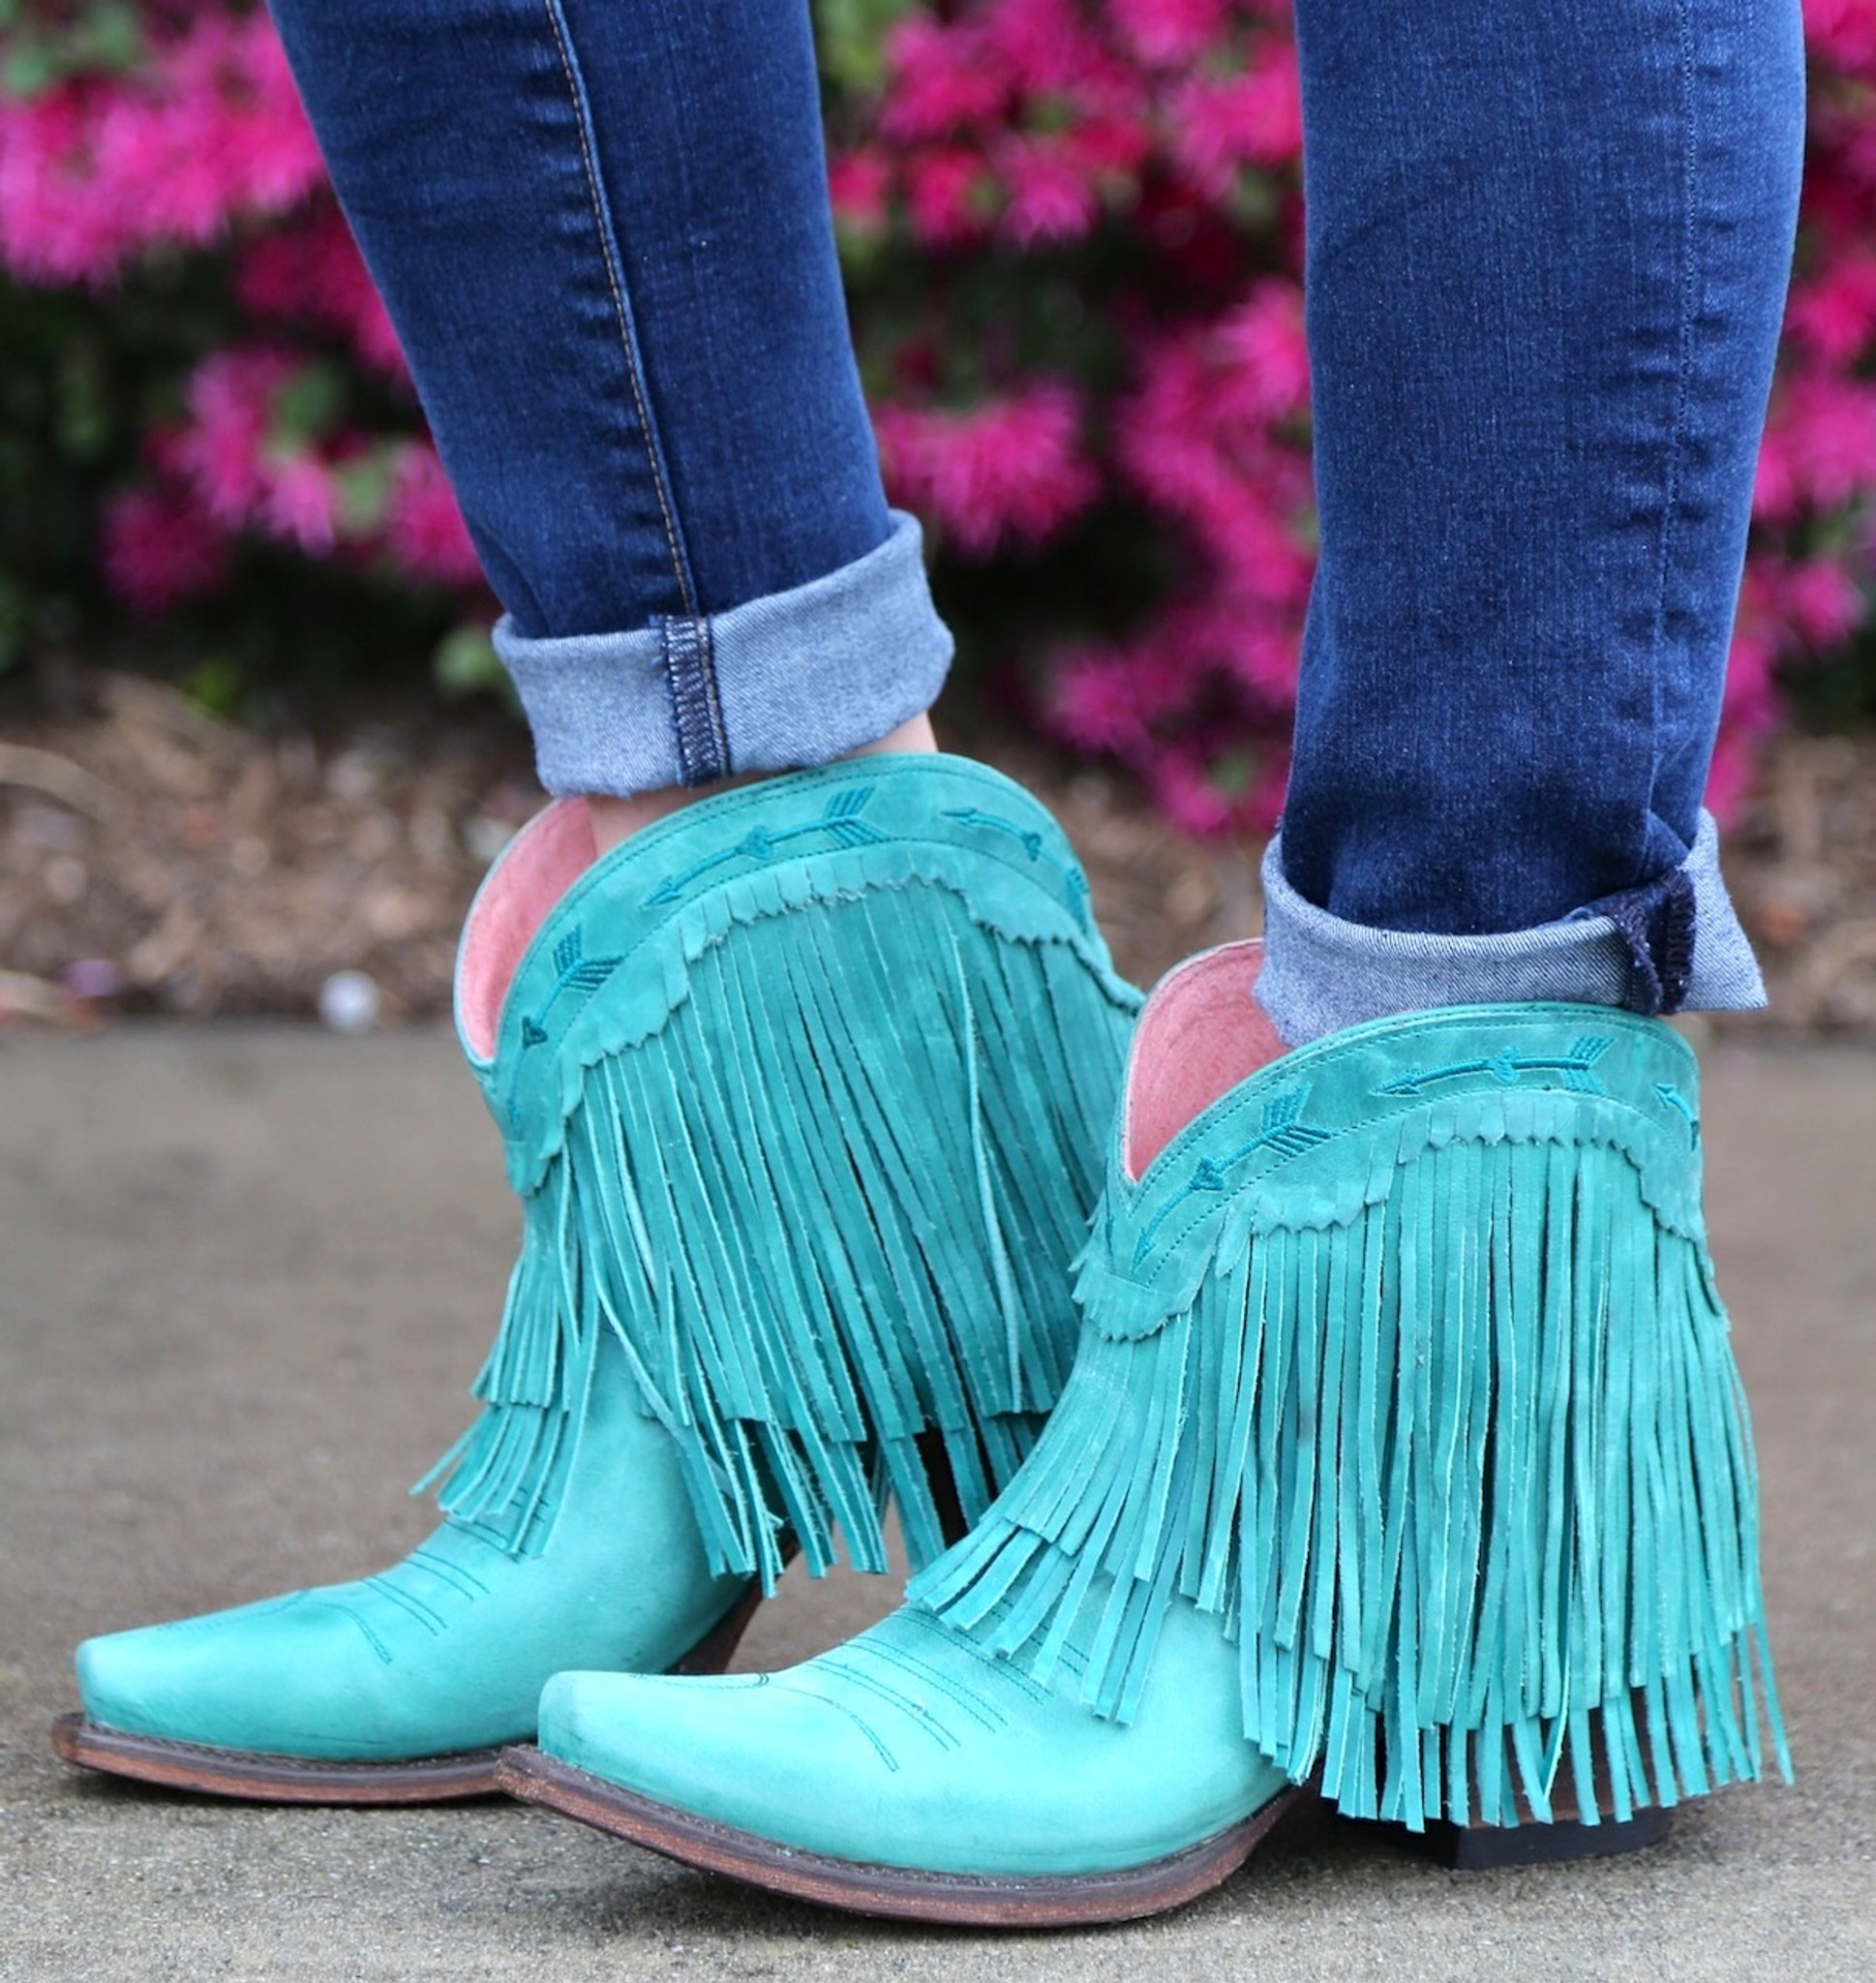 https://cdn11.bigcommerce.com/s-b72d8/images/stencil/2048x2048/products/2143/8868/_Junk_Gypsy_by_Lane_Spitfire_Turquoise_Boots_JG0007D_Picture__53124.1458580816.JPG?c=2